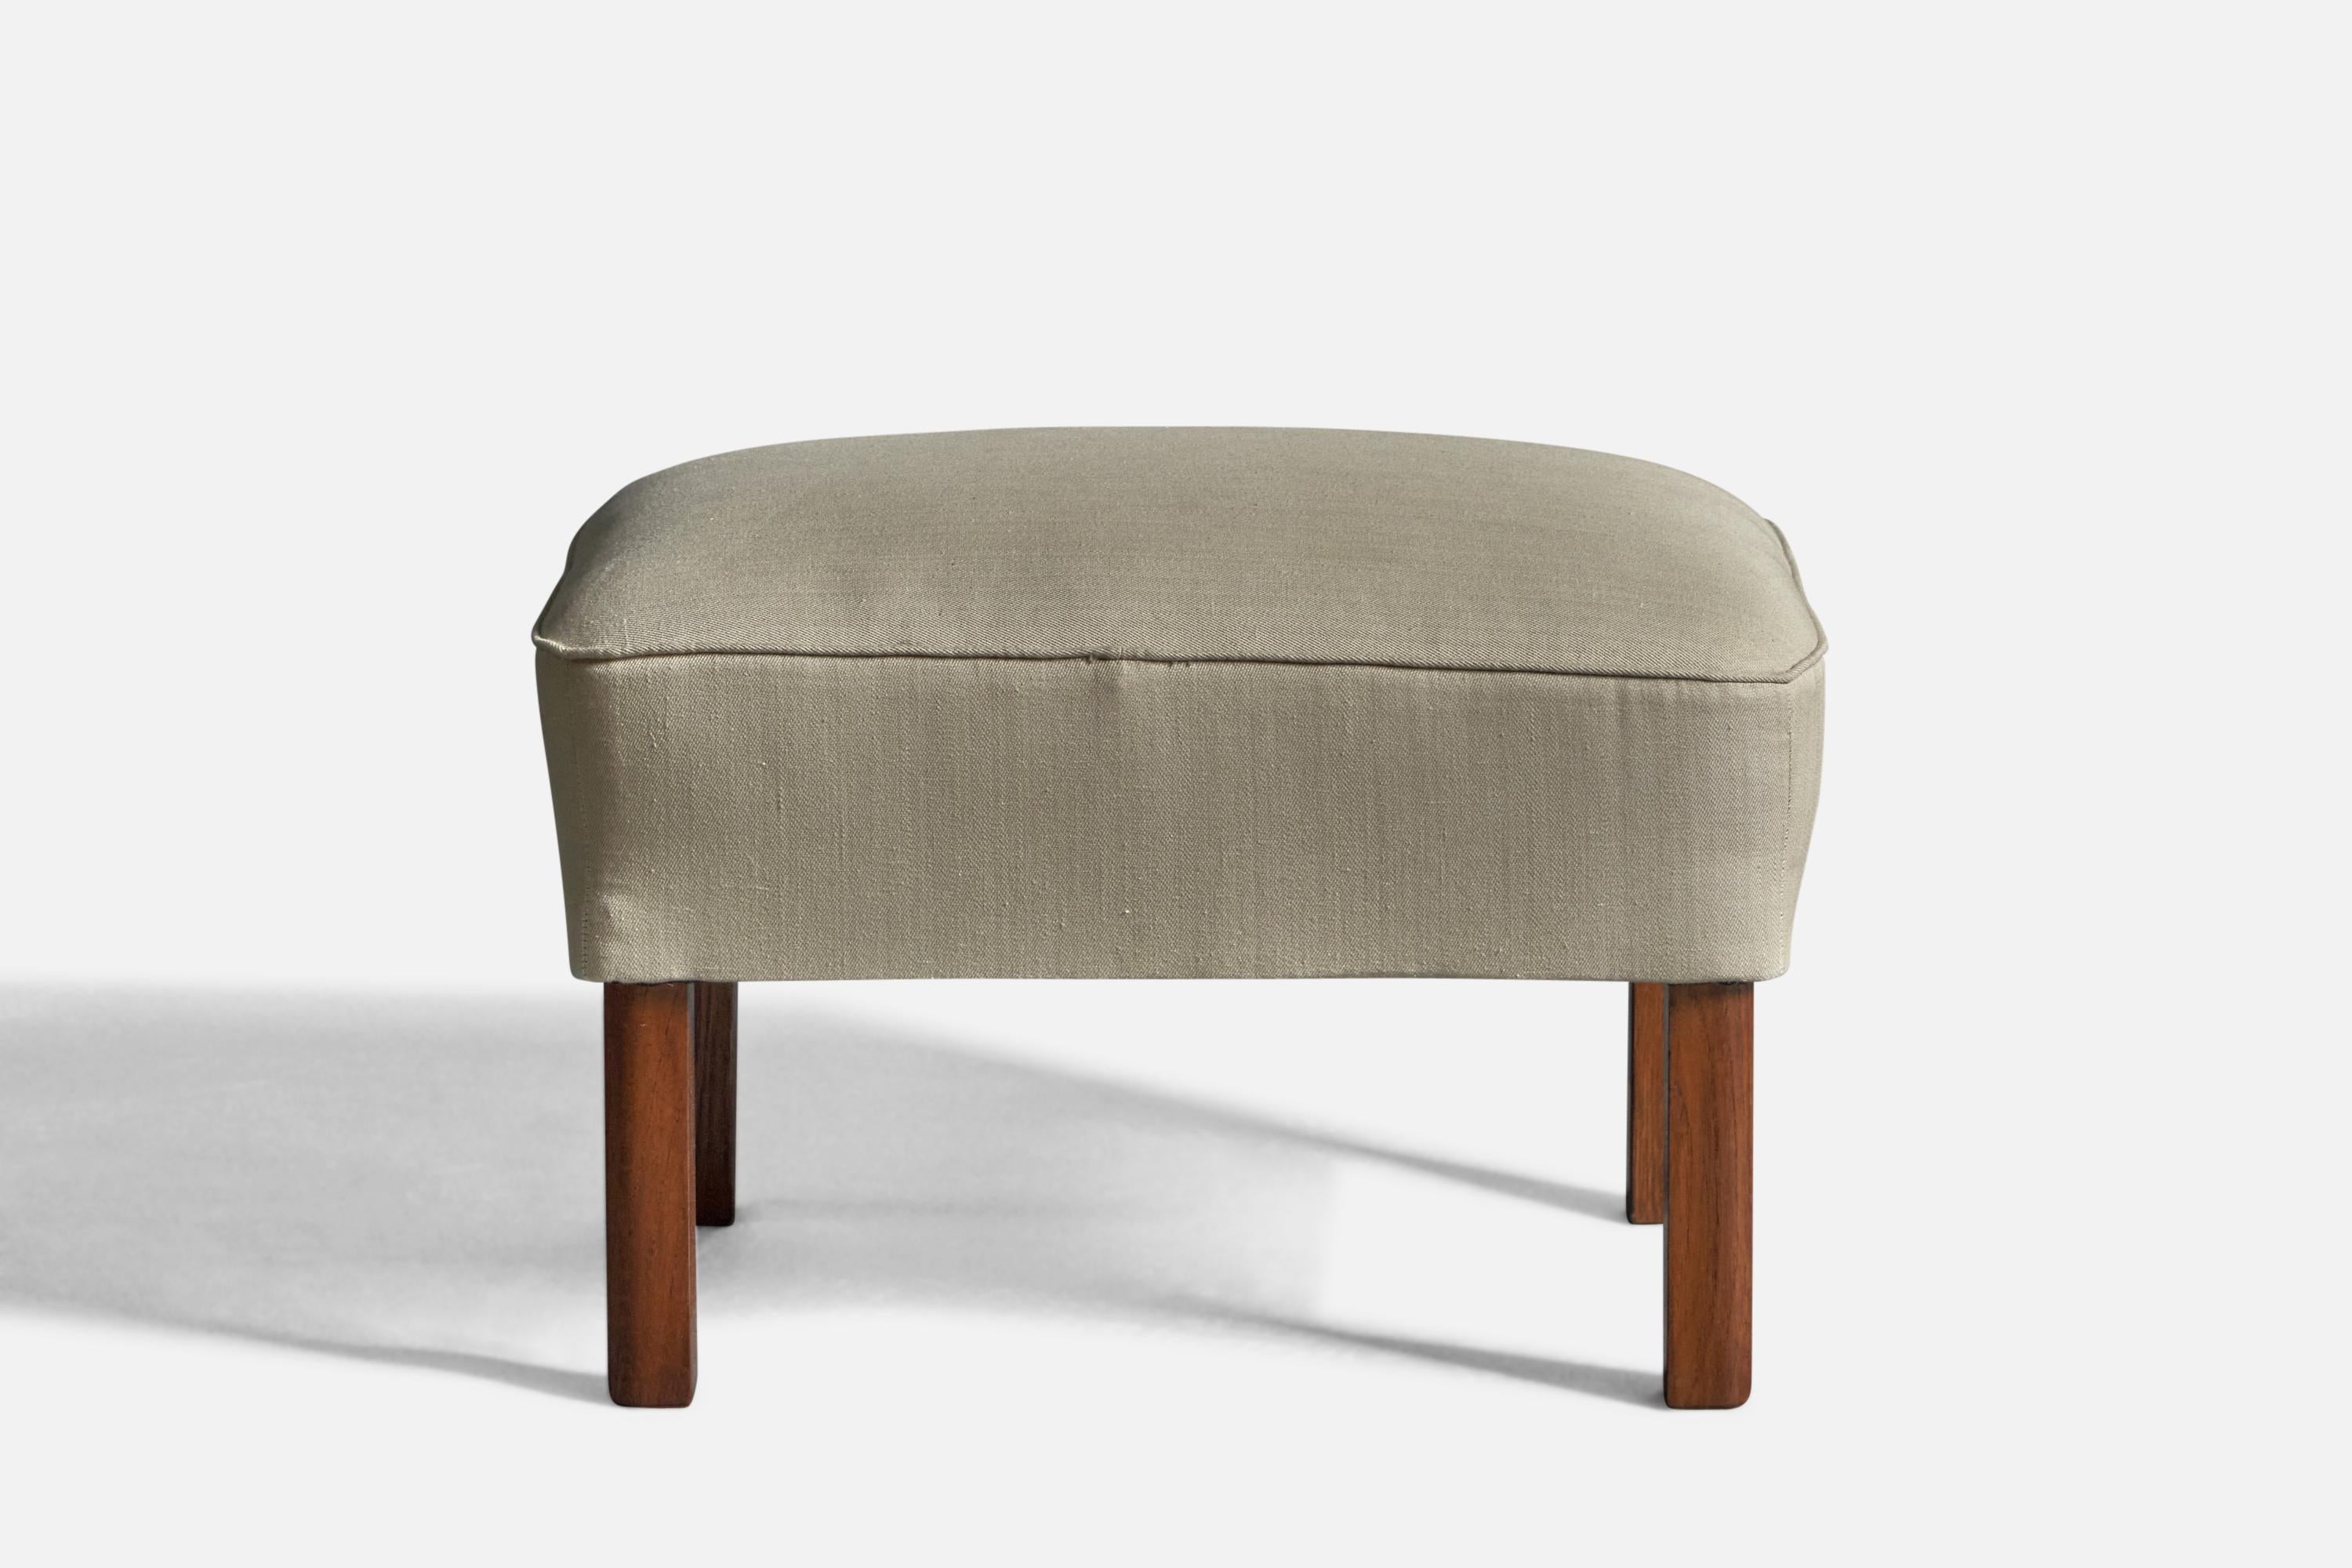 Modern Melchiorre Bega, Stool, Wood, Fabric, Italy, 1930s For Sale